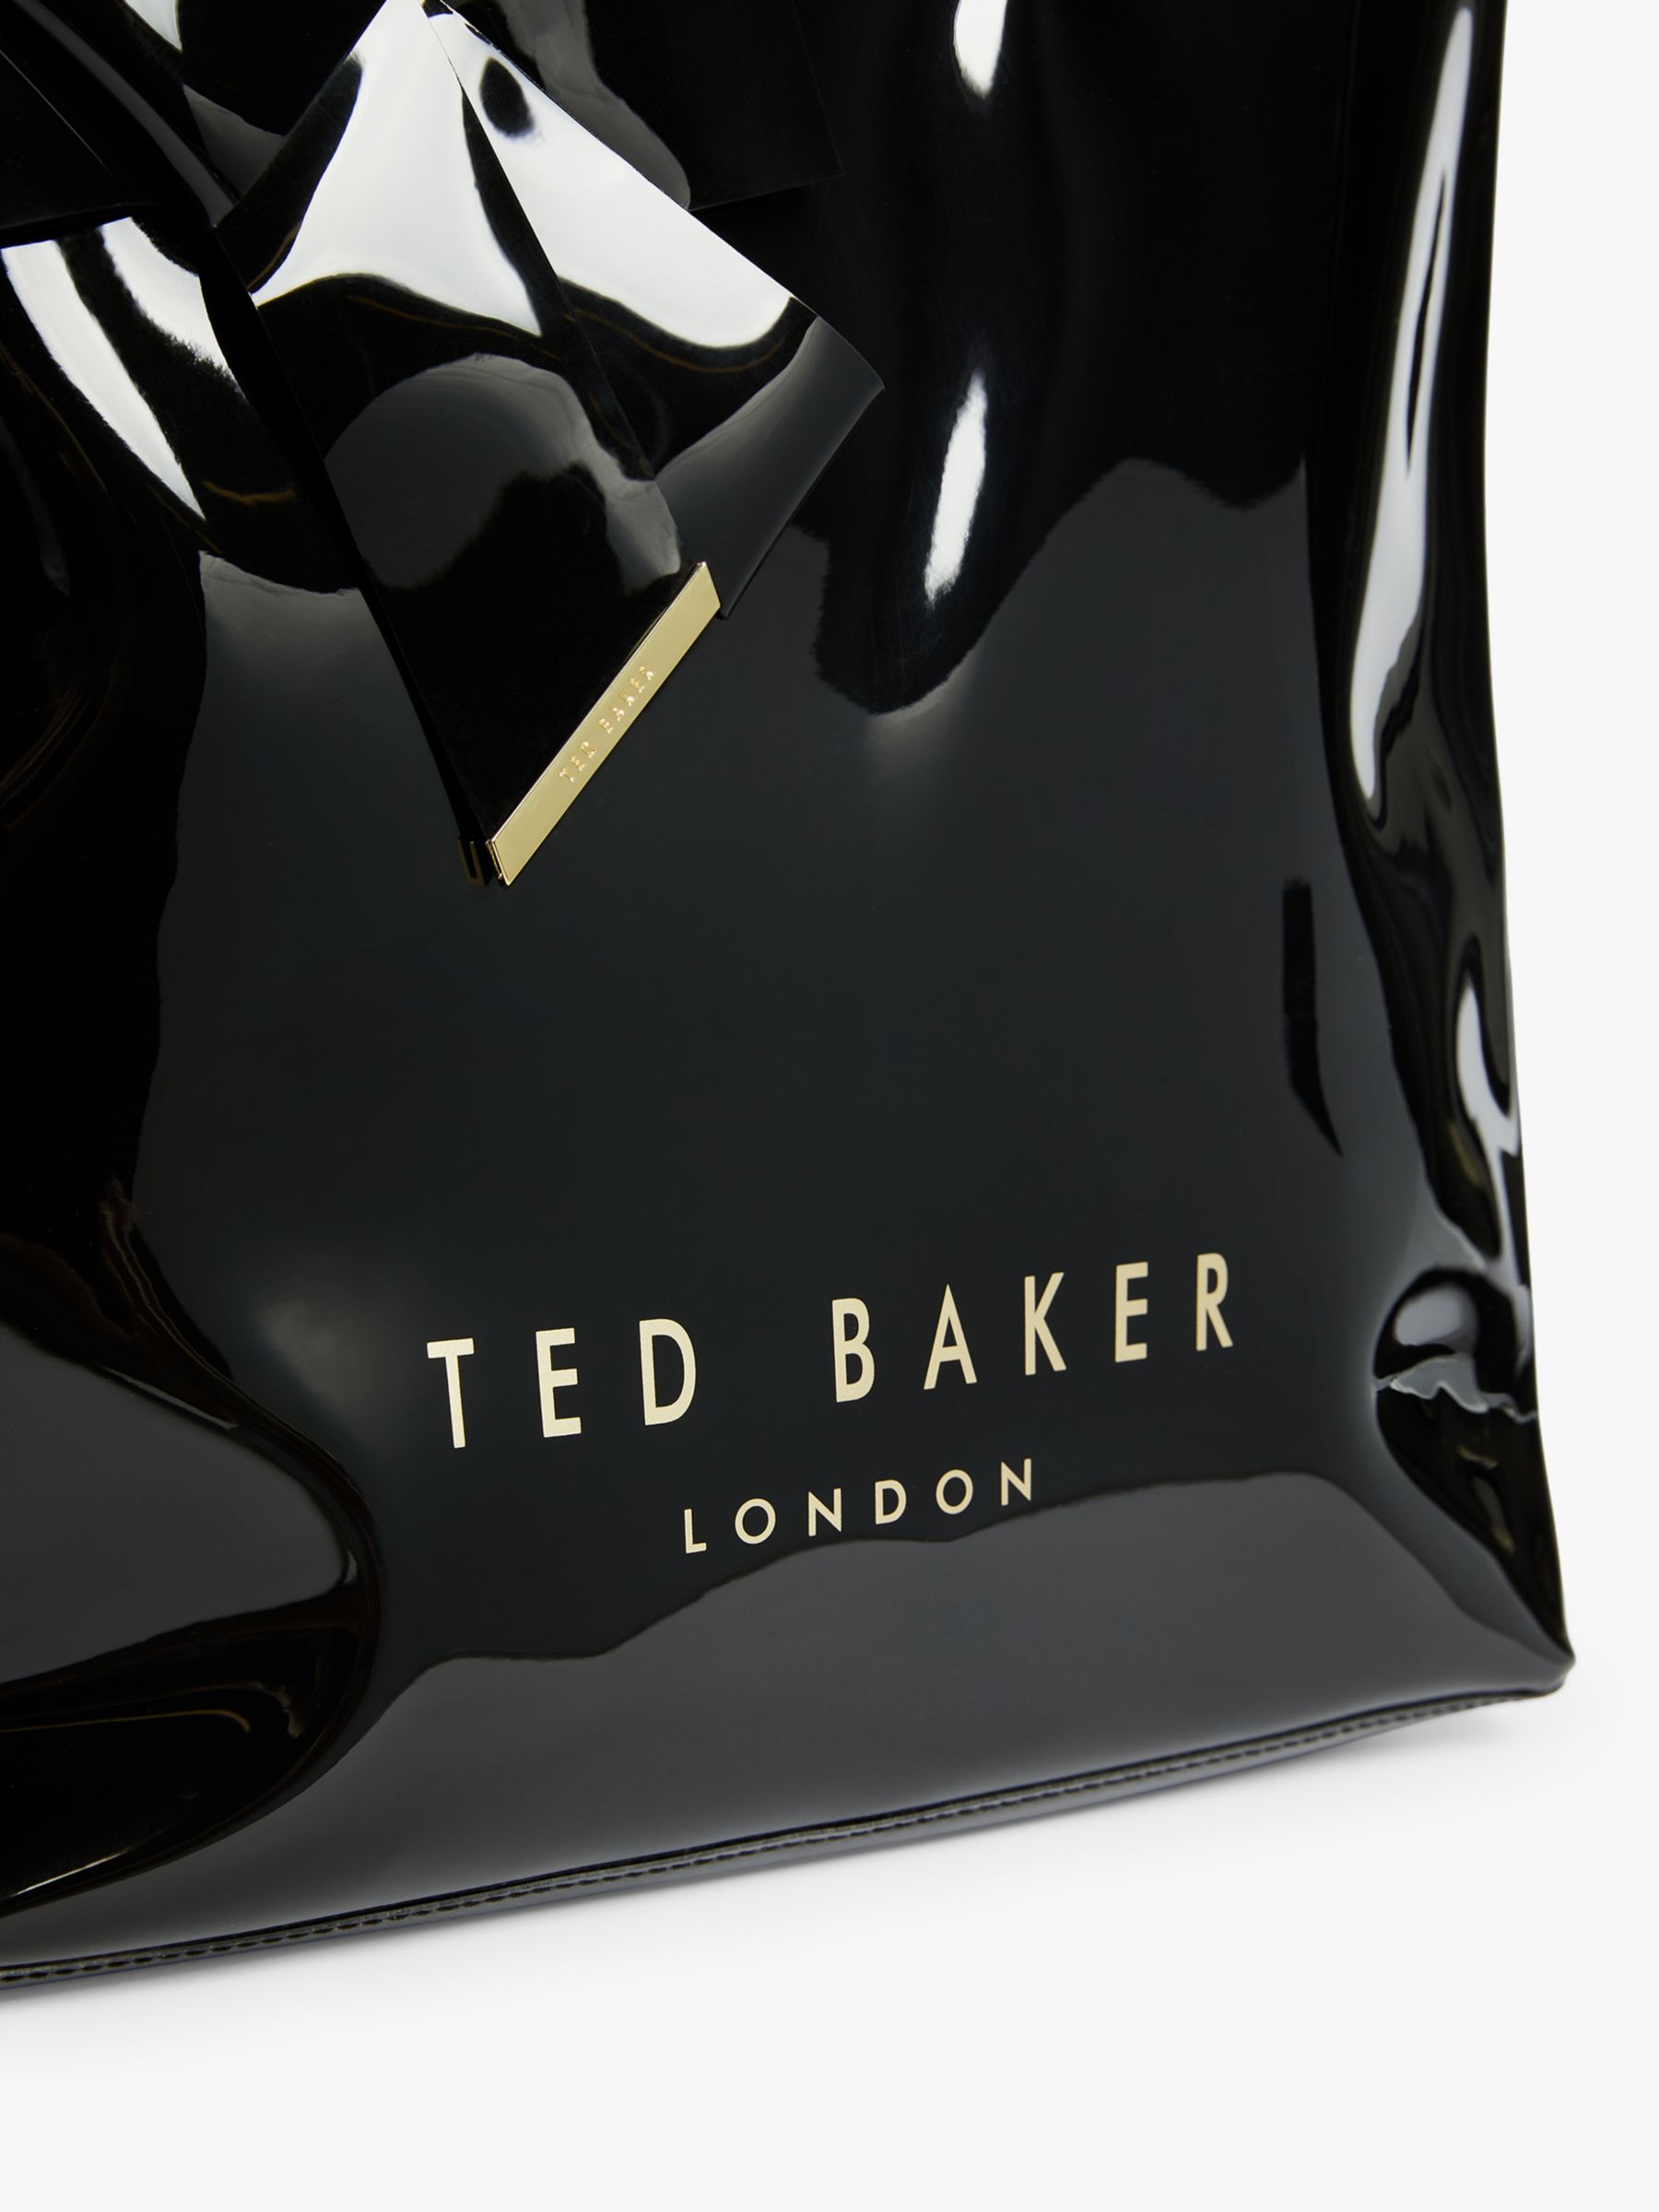 TED BAKER London Black Icon Bag Blk Bow Tote Shopper 10x9 Gold Accents